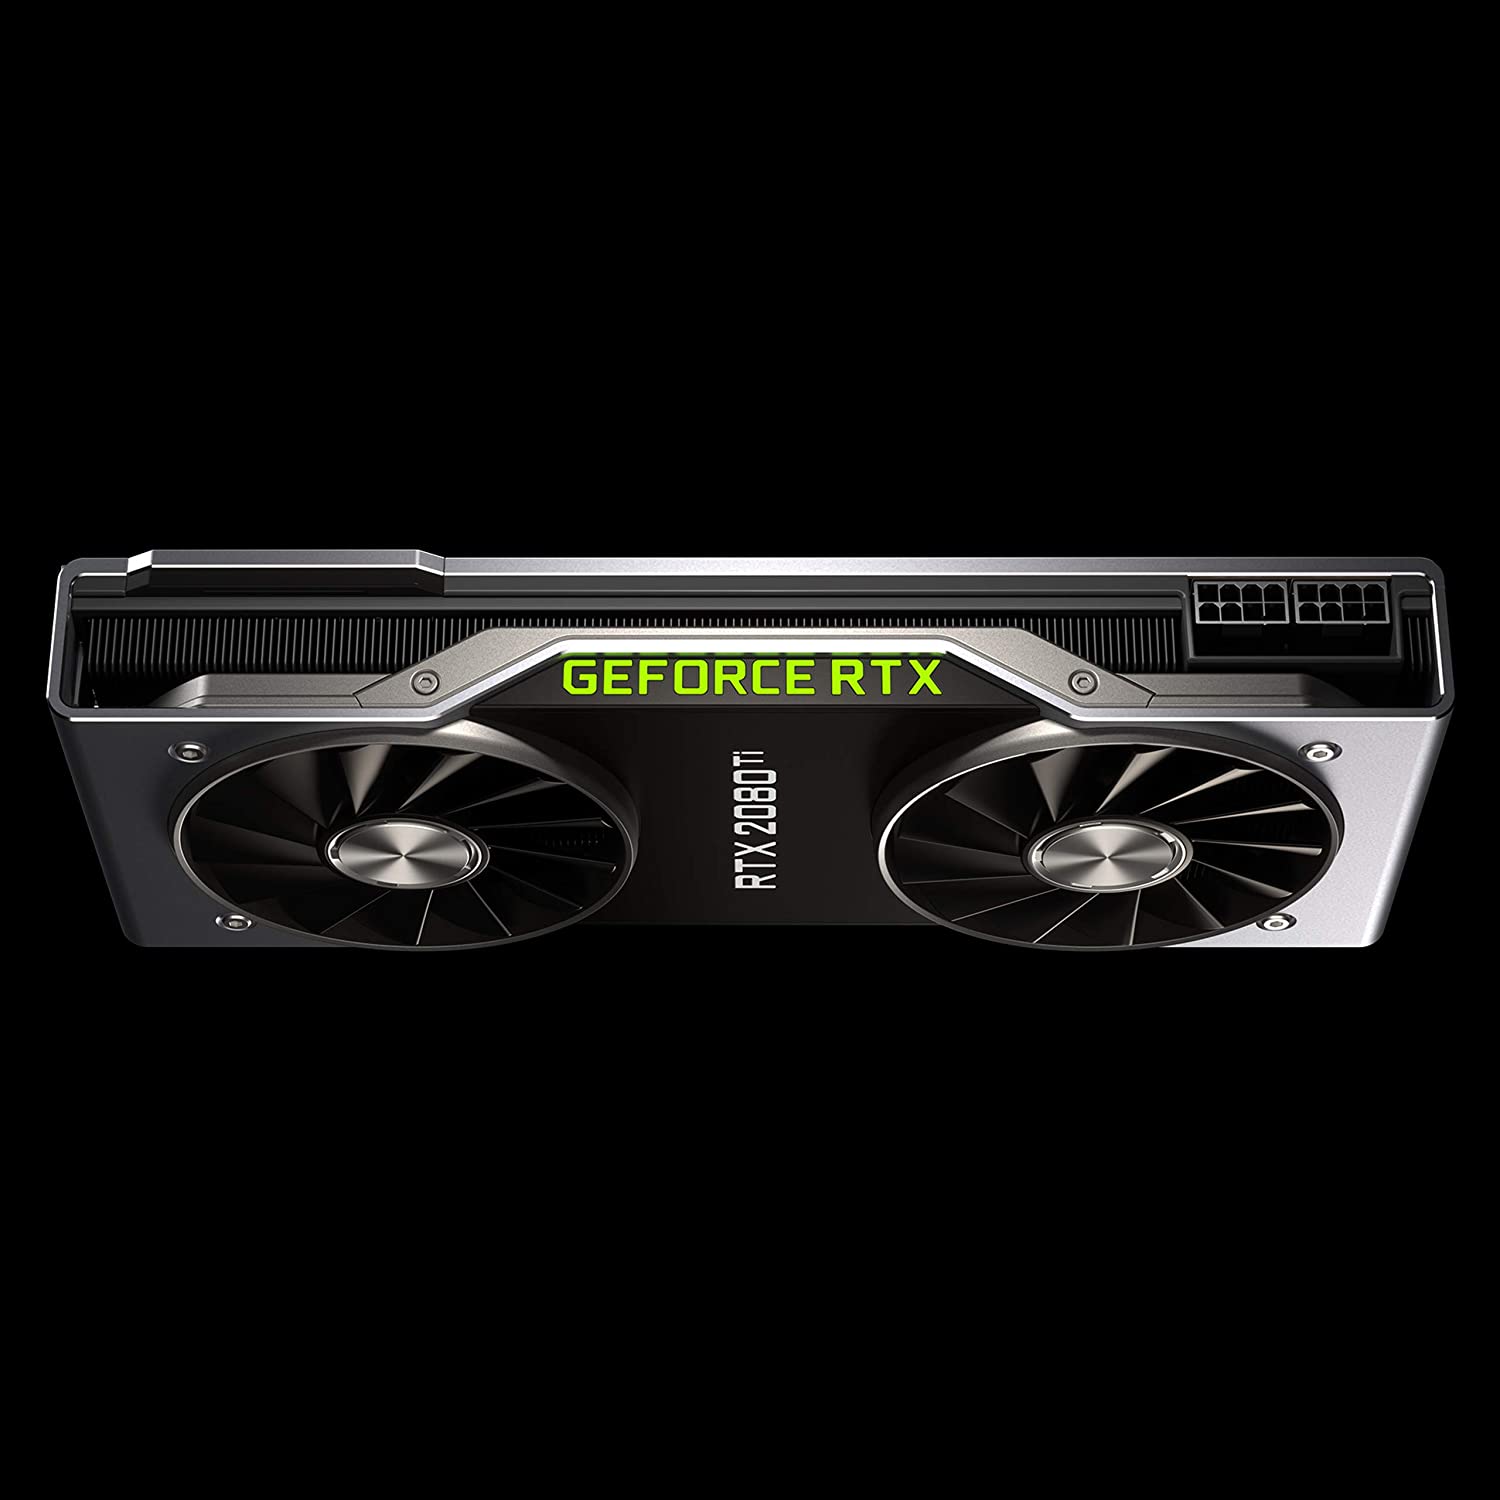 NVIDIA Geforce RTX 2080 Ti Founders Edition-1